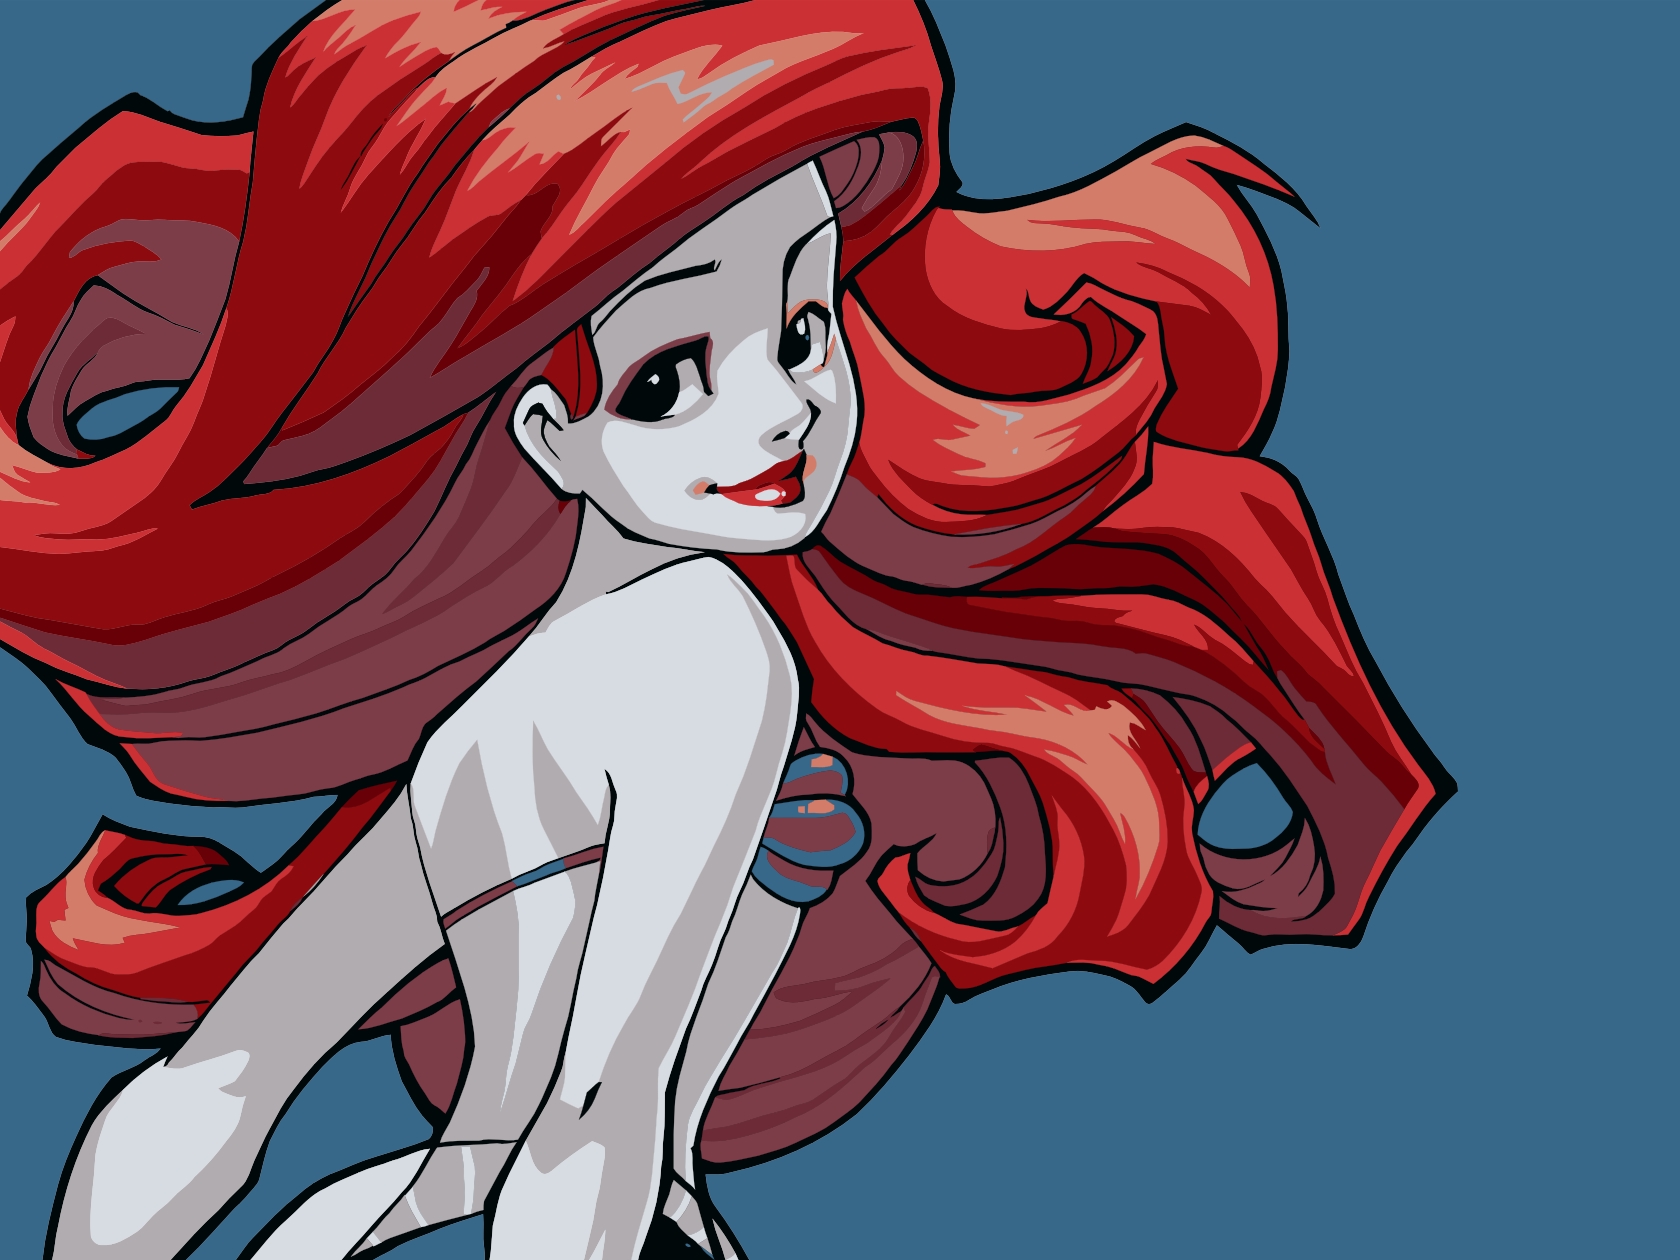 Ariel from The Little Mermaid with beautiful red hair, swimming as a mermaid.